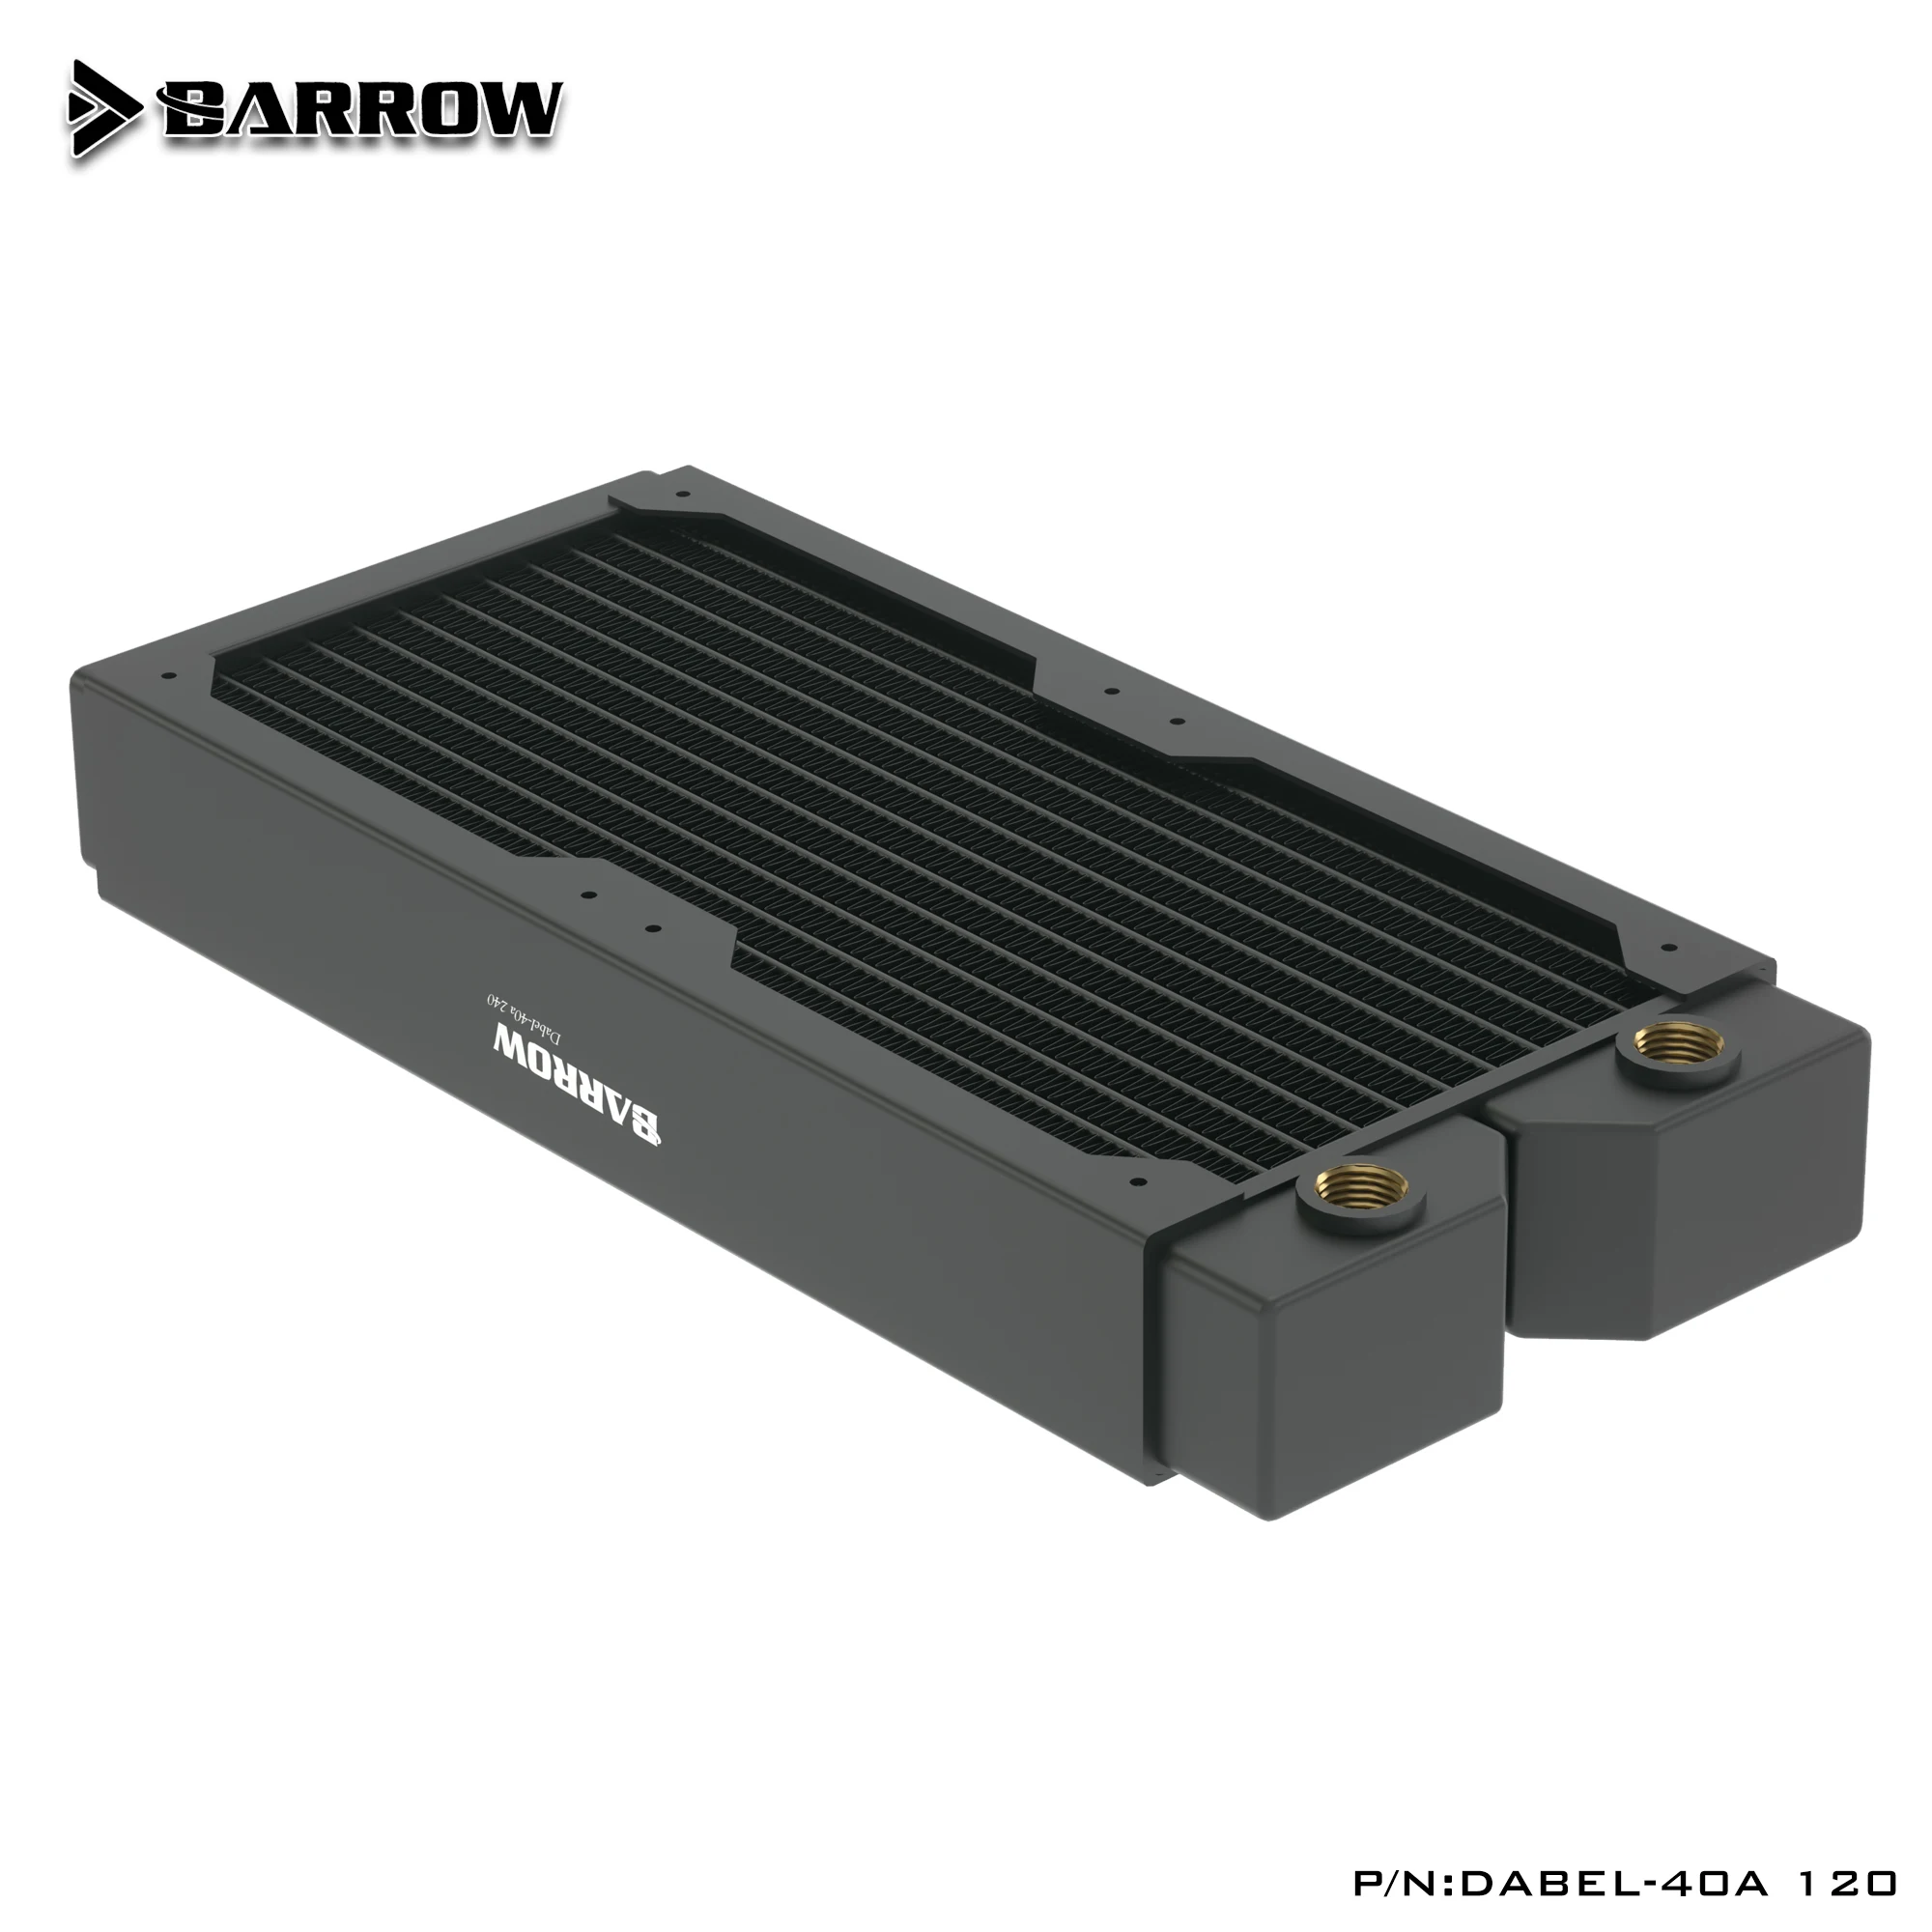 Barrow Dabel-40a Dabel 240mm 2 x 12cm 40mm Height Copper Radiator Water Cooling enlarge